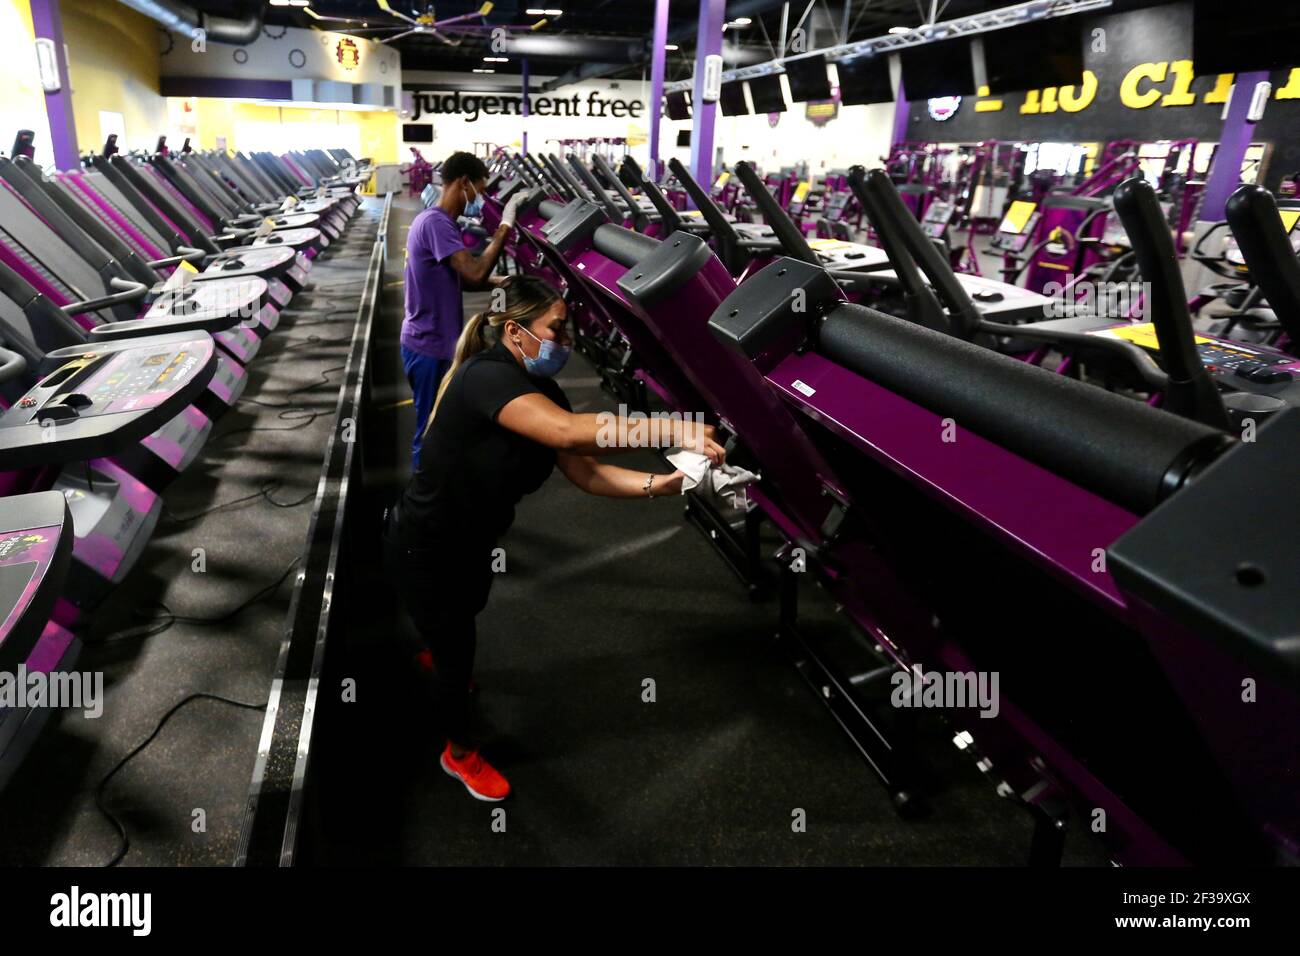 Los Angeles, USA. 16th Mar, 2021. Staff members of Planet Fitness